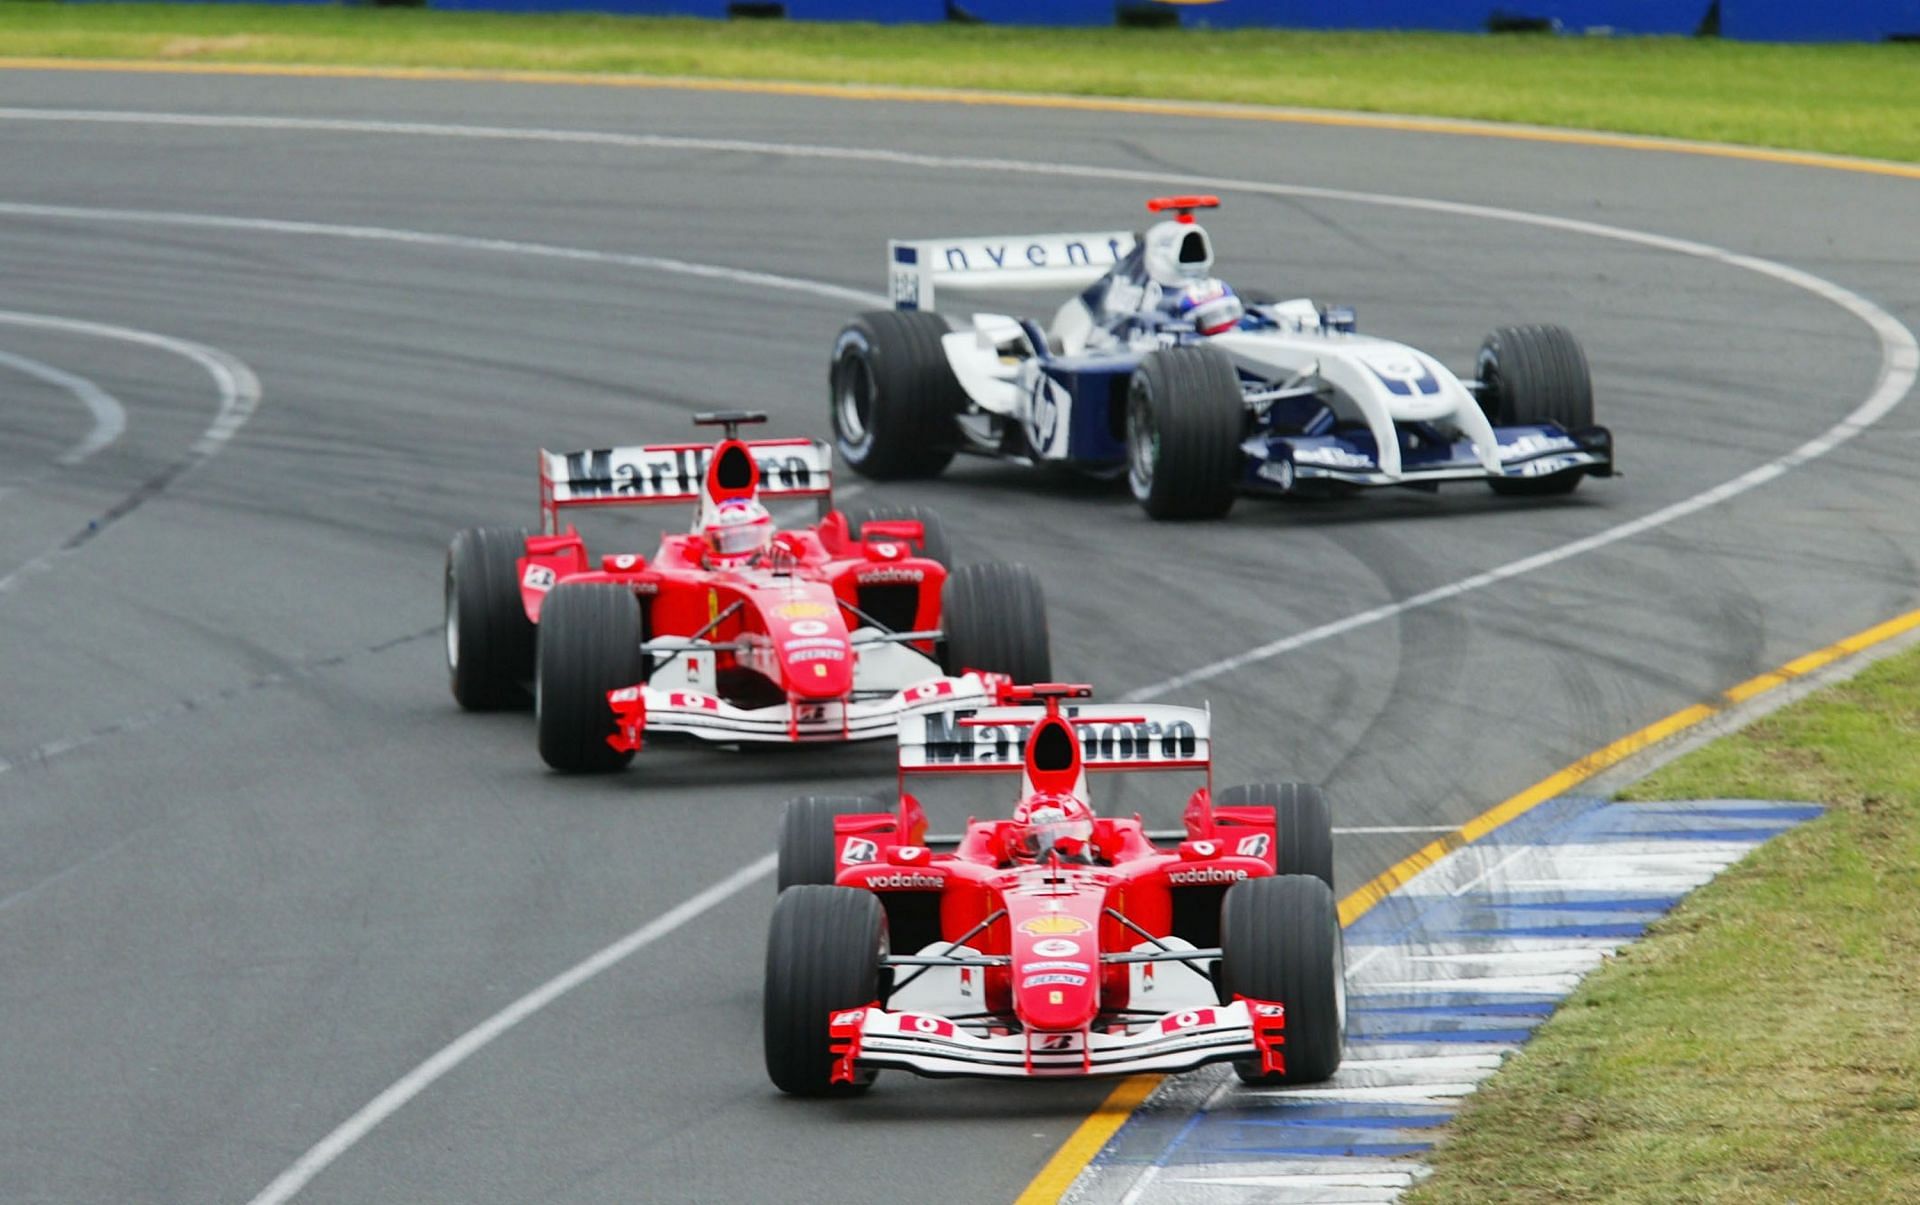 Michael Schumacher leading the Ferrari F2004 (V10) in 2004 (Photo by Mark Thompson/Getty Images)